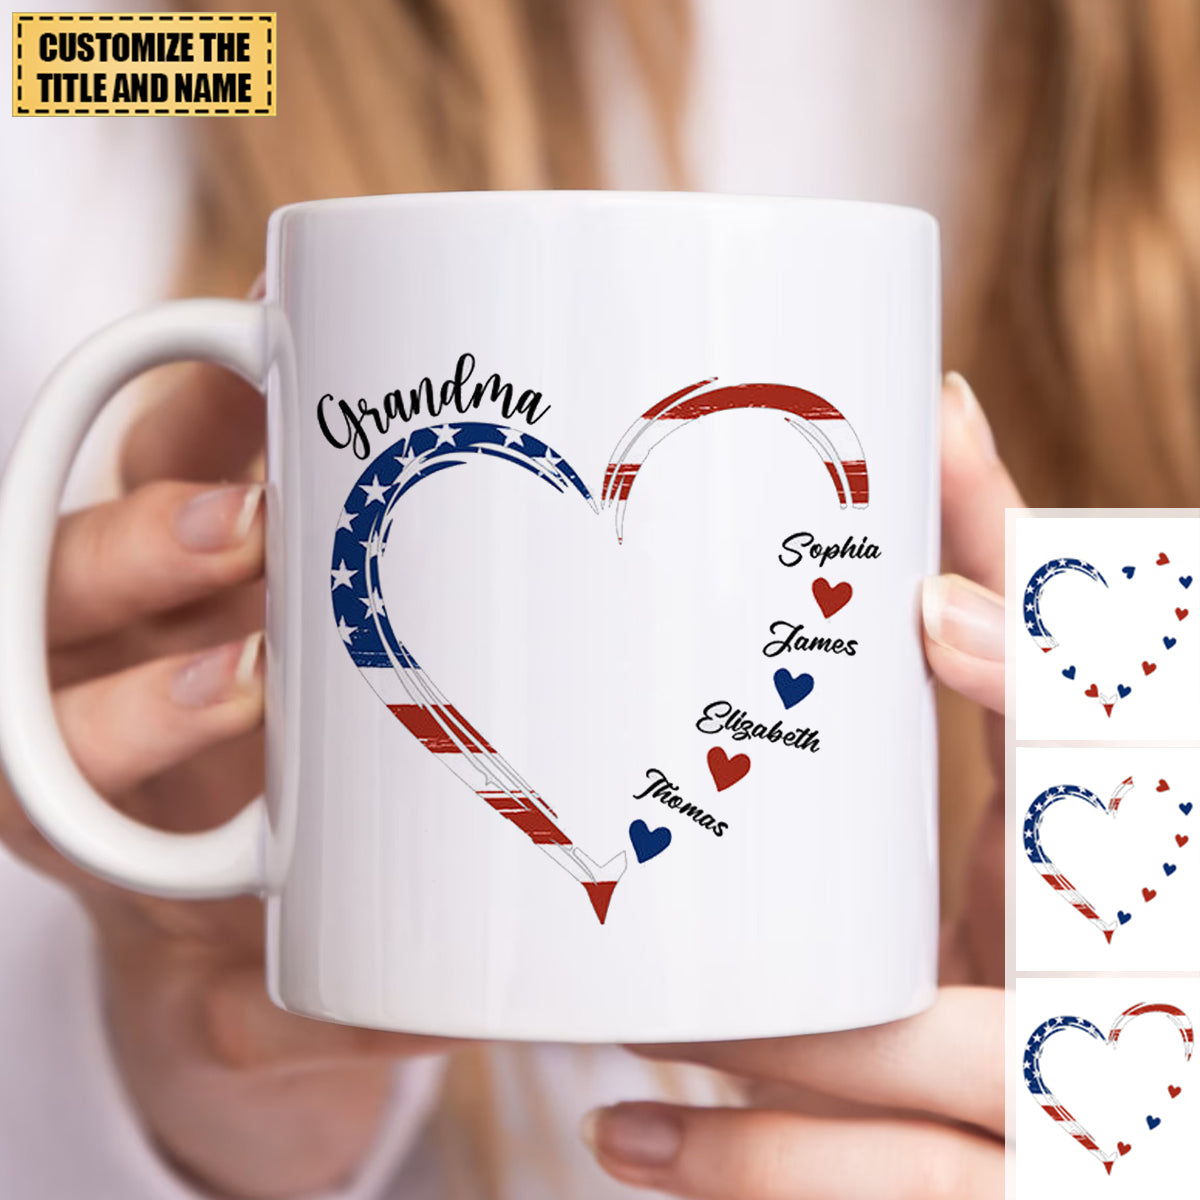 A Garden Of Love Grows In A Grandma's Heart - Personalized mug